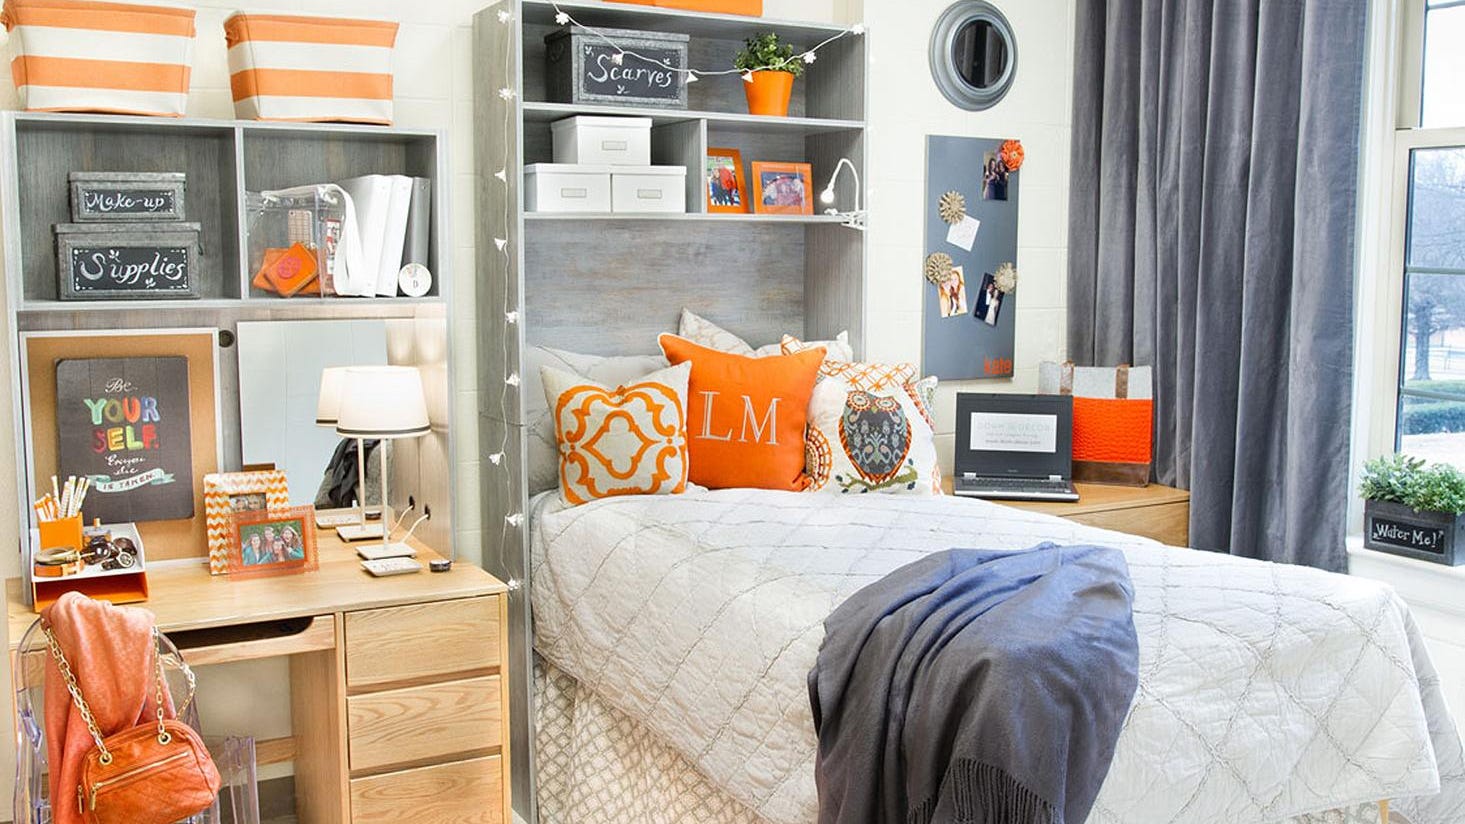 20+ decorations for a dorm room To personalize and liven up your space